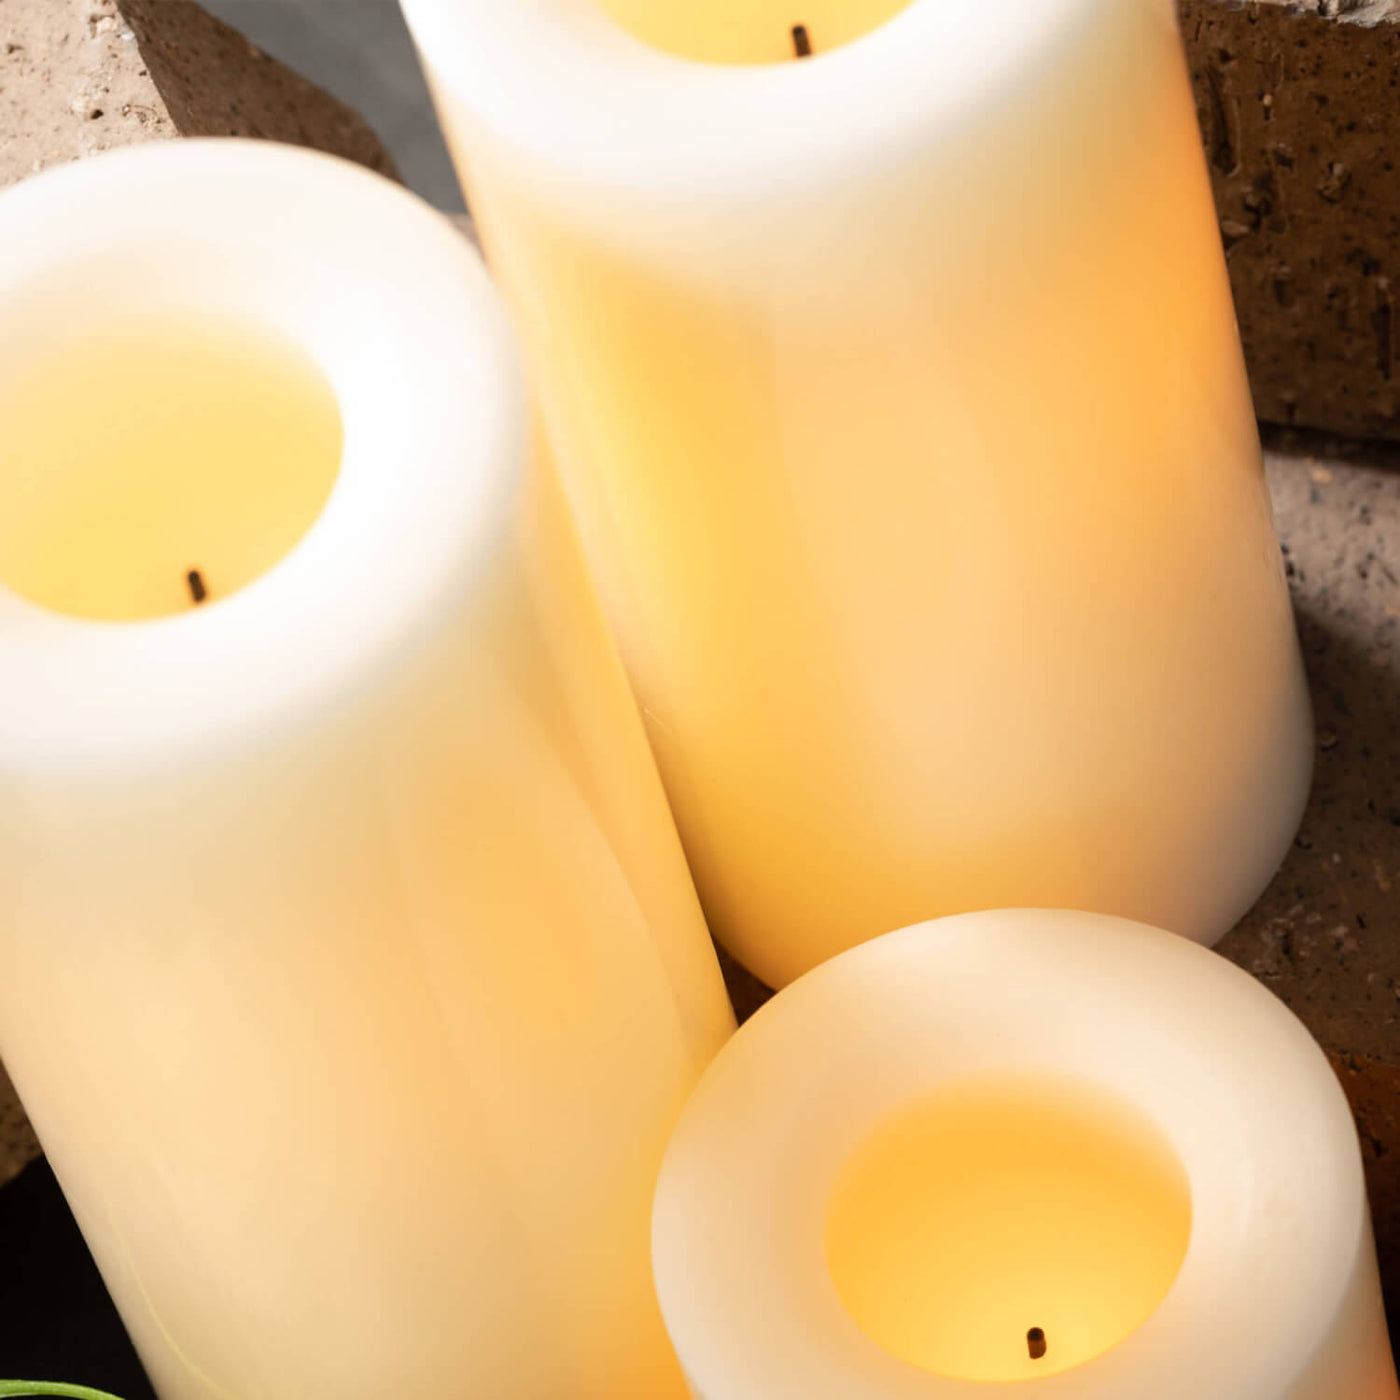 6” Outdoor Weighted LED Pillar Candle